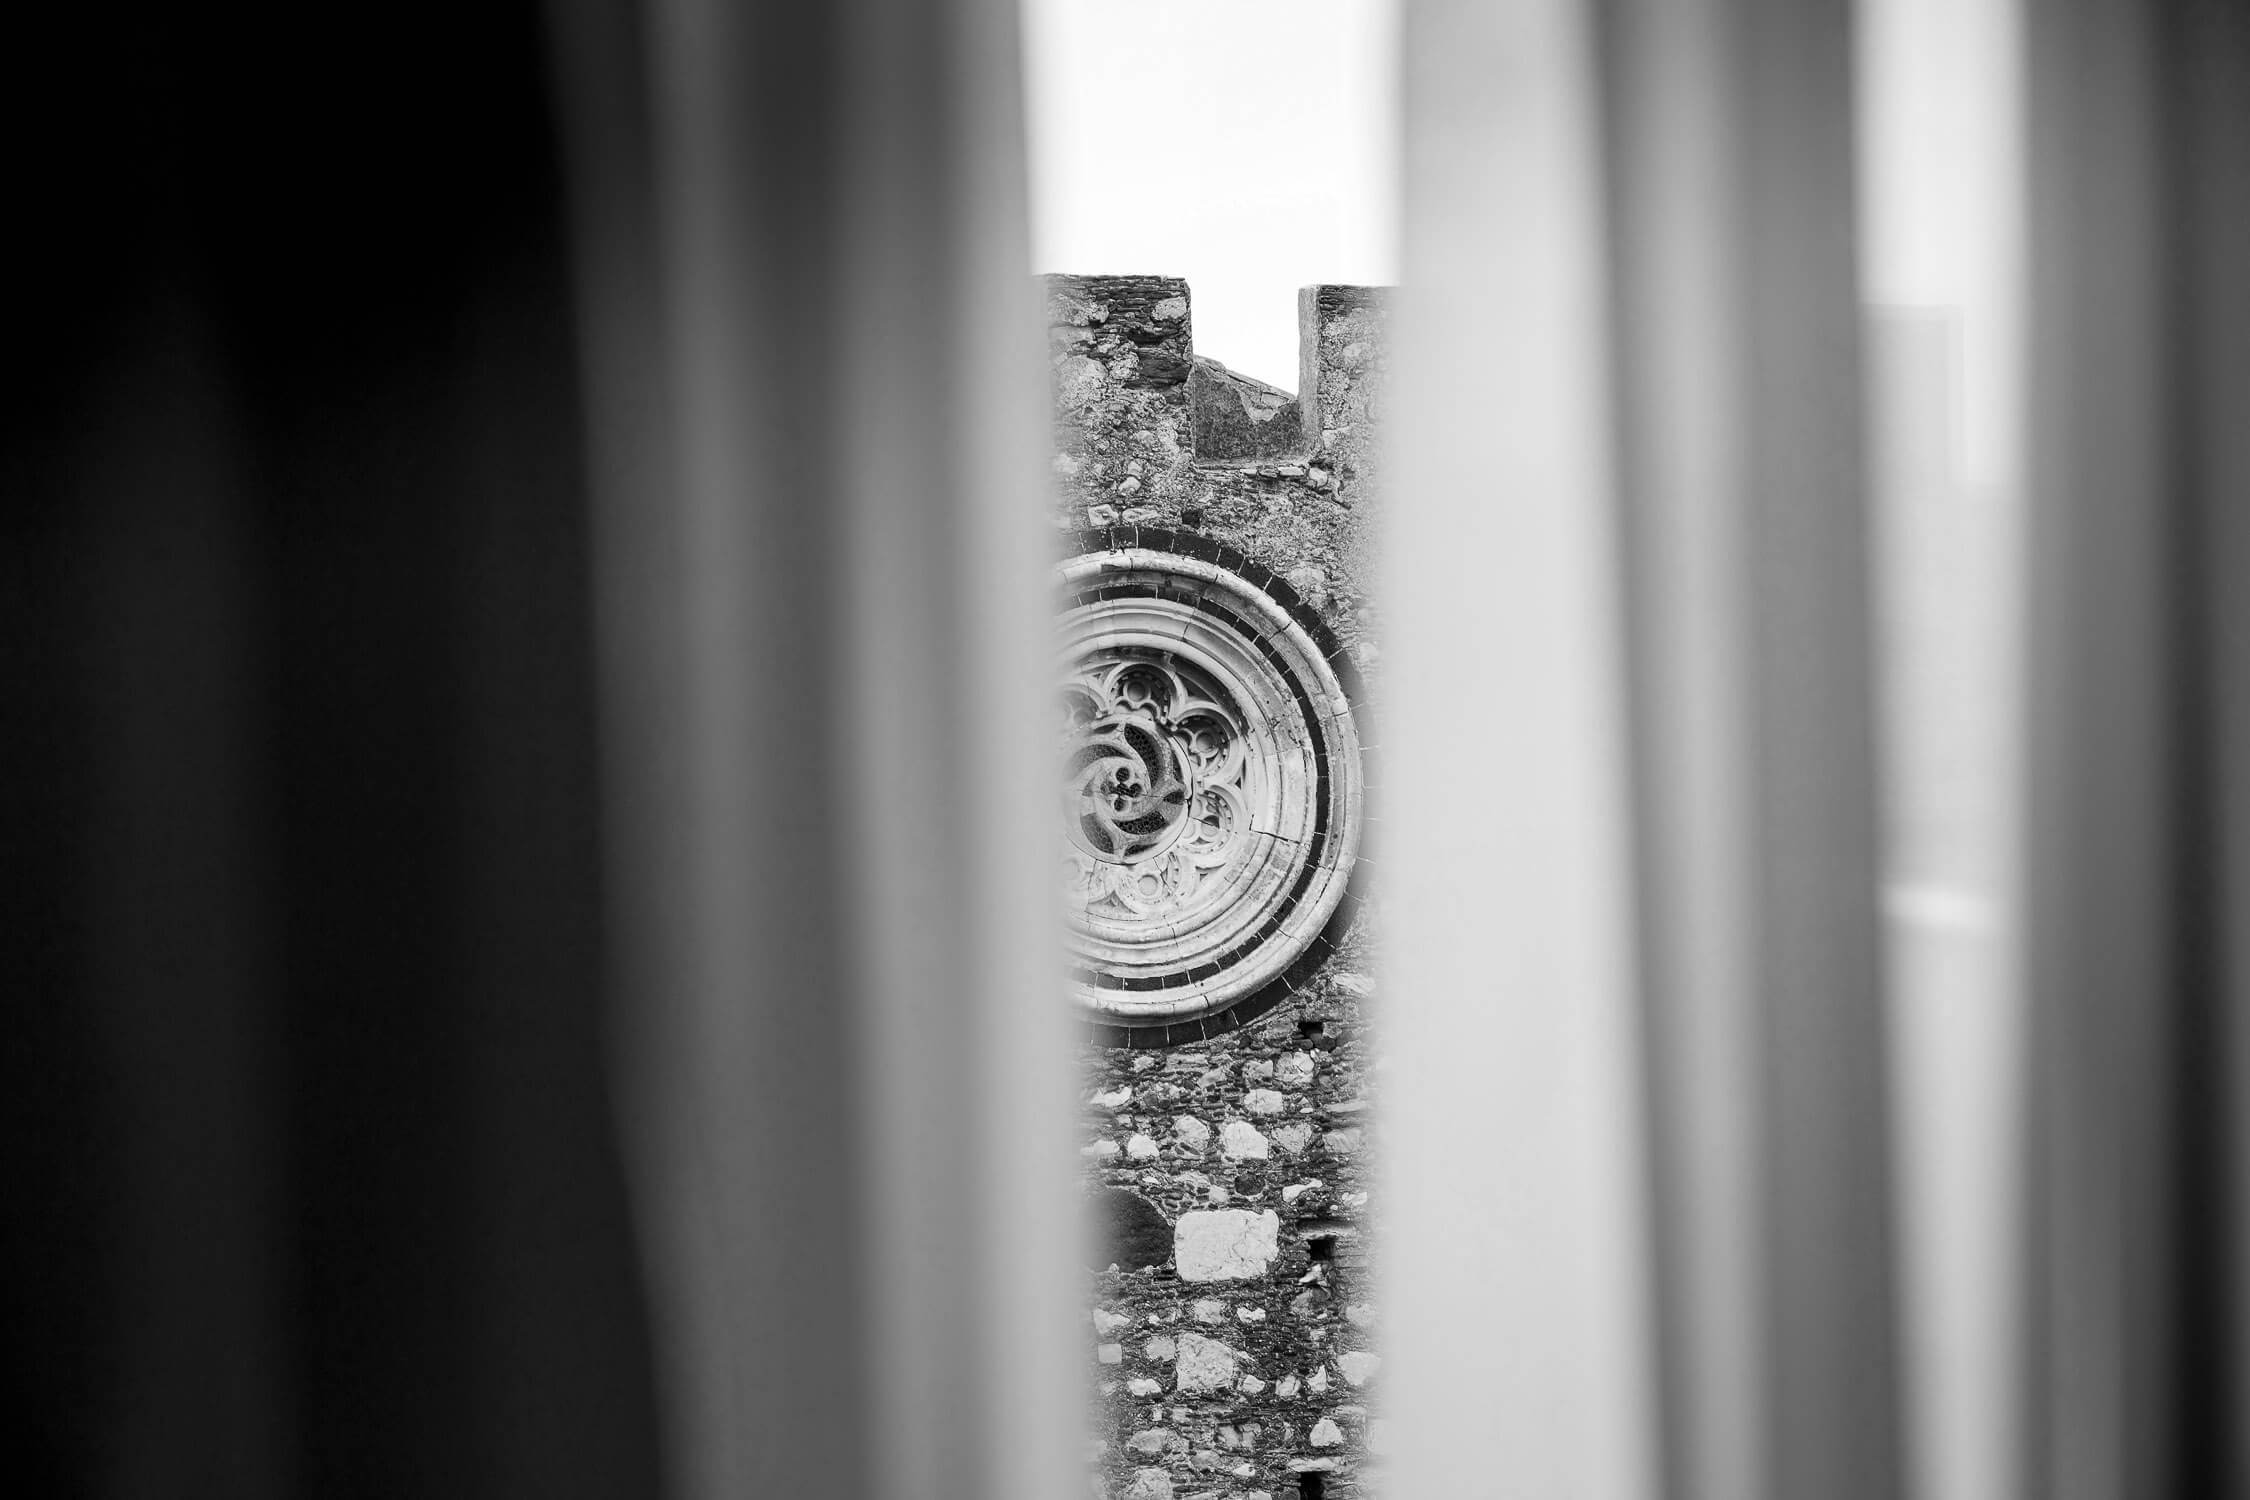 Glimpses from the hotel, black and white photo for Nino Lombardo's wedding